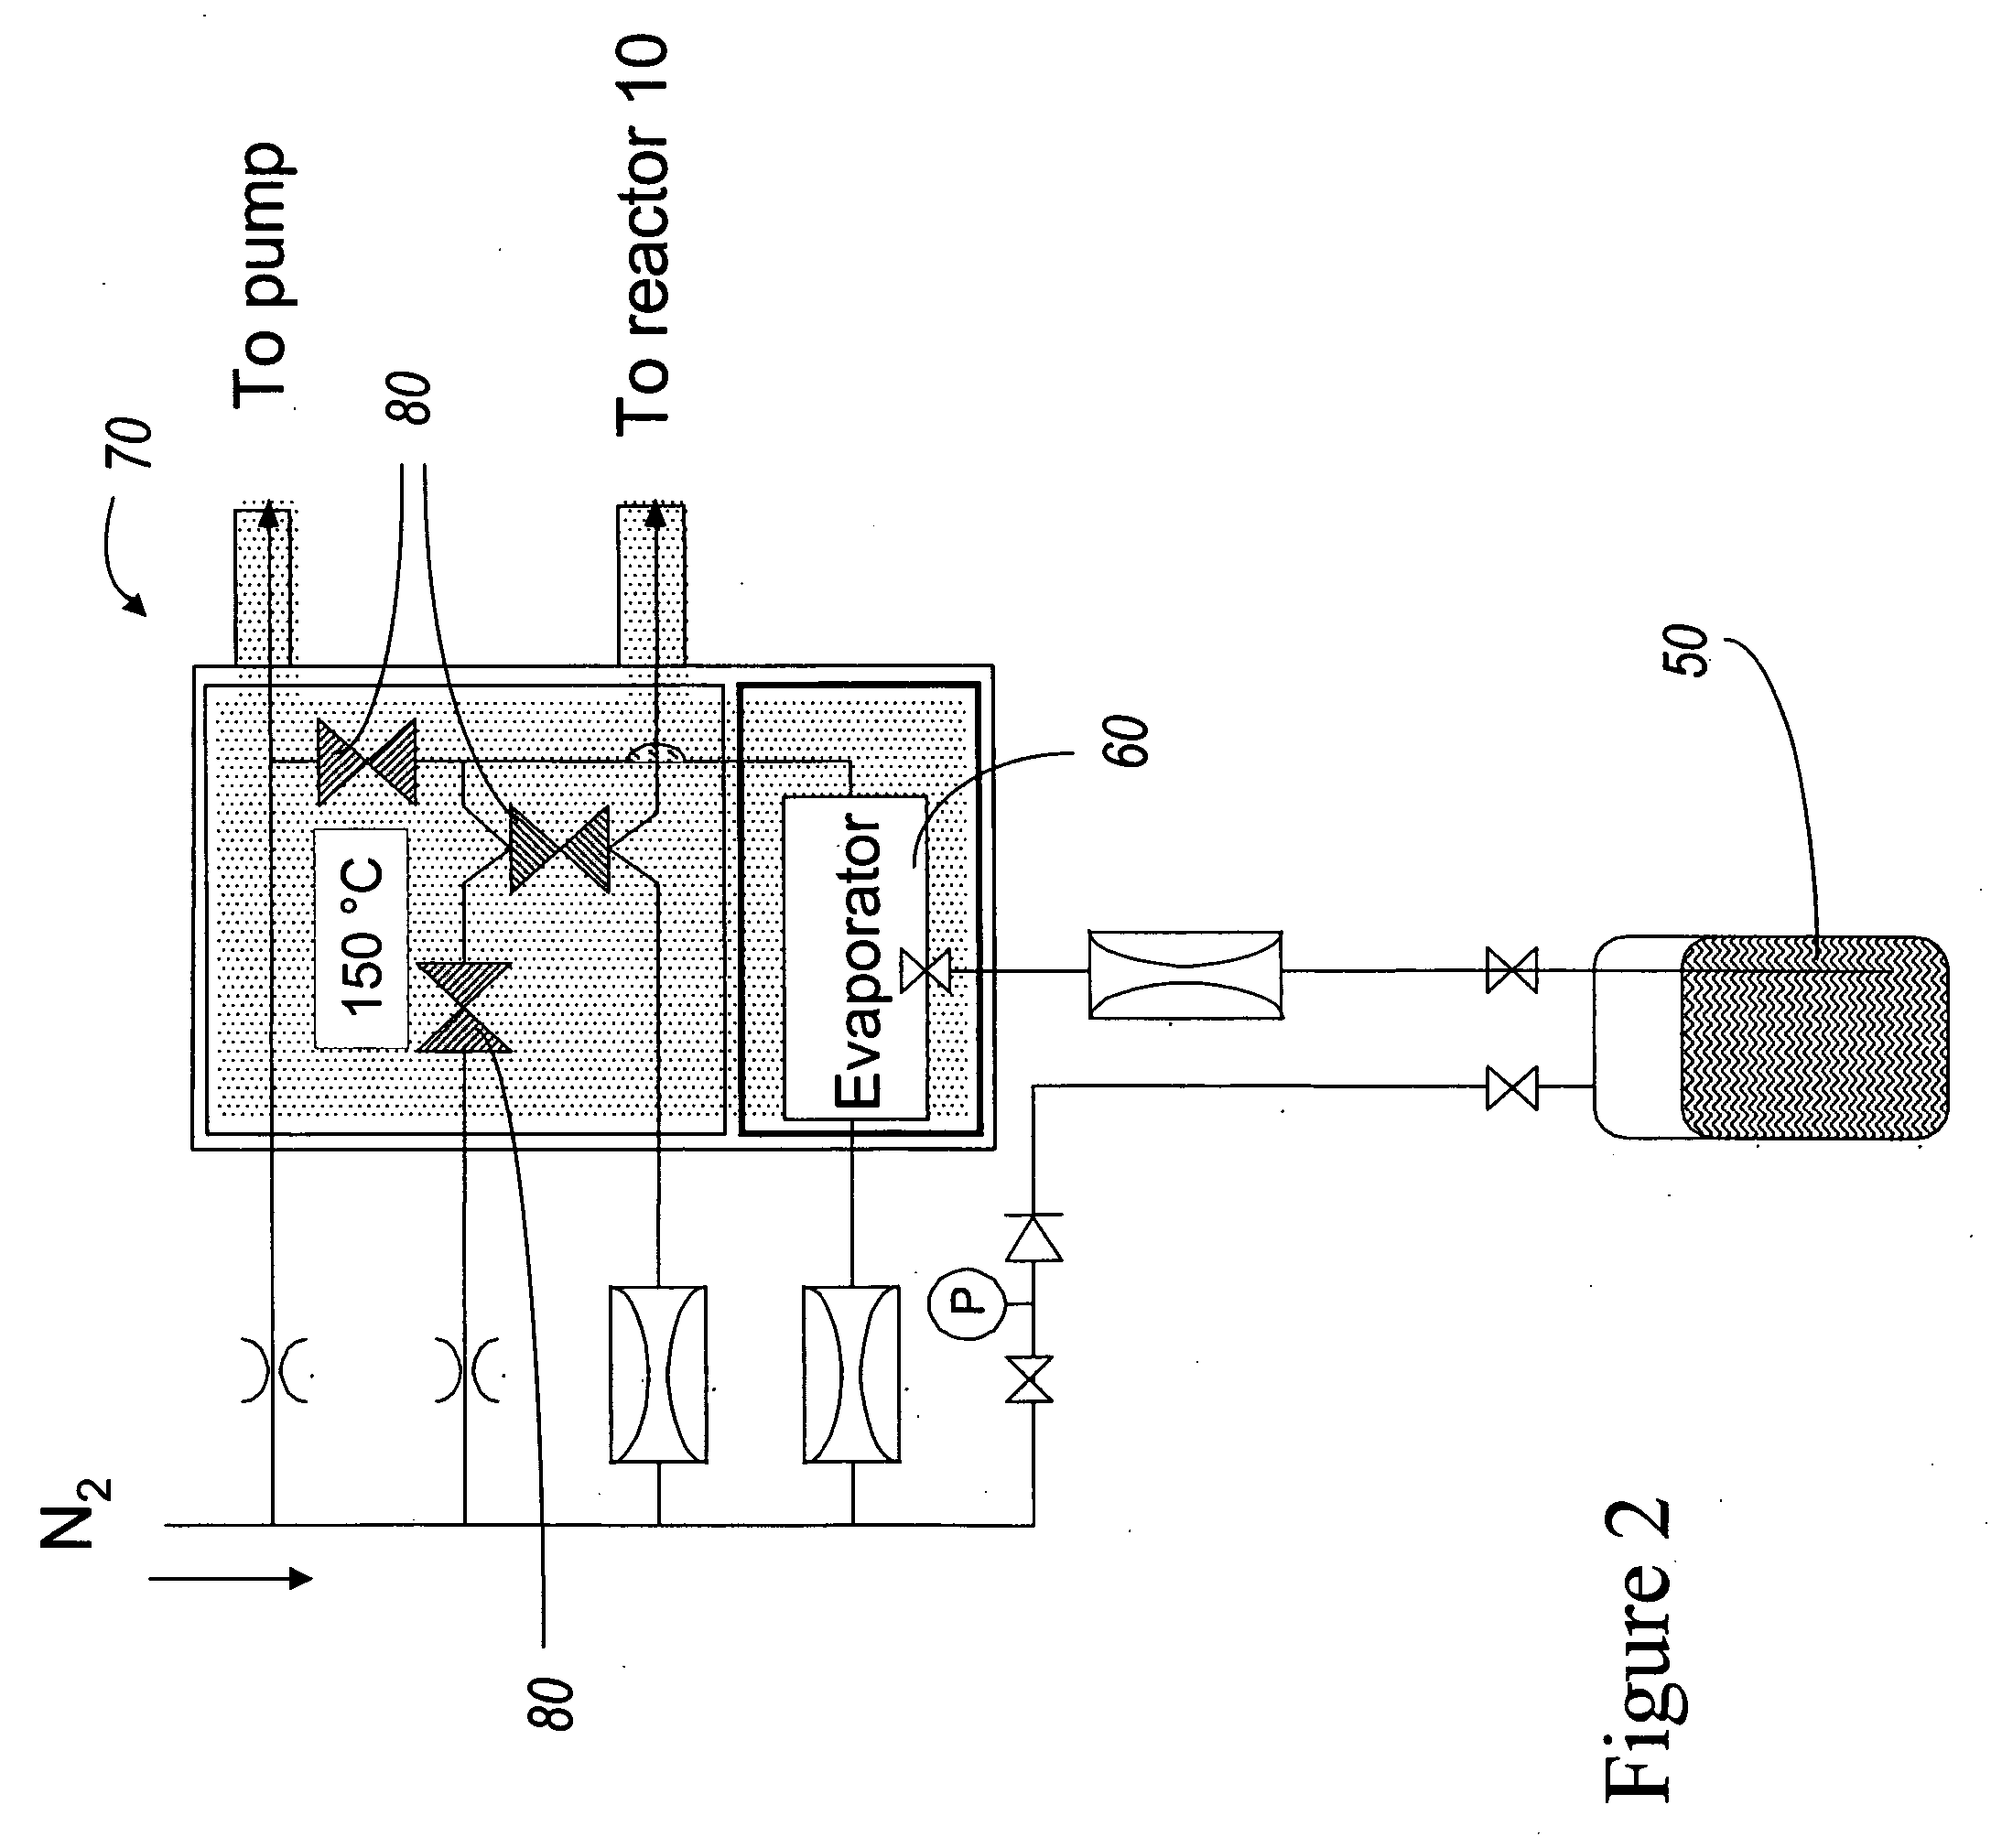 Deposition of TiN films in a batch reactor